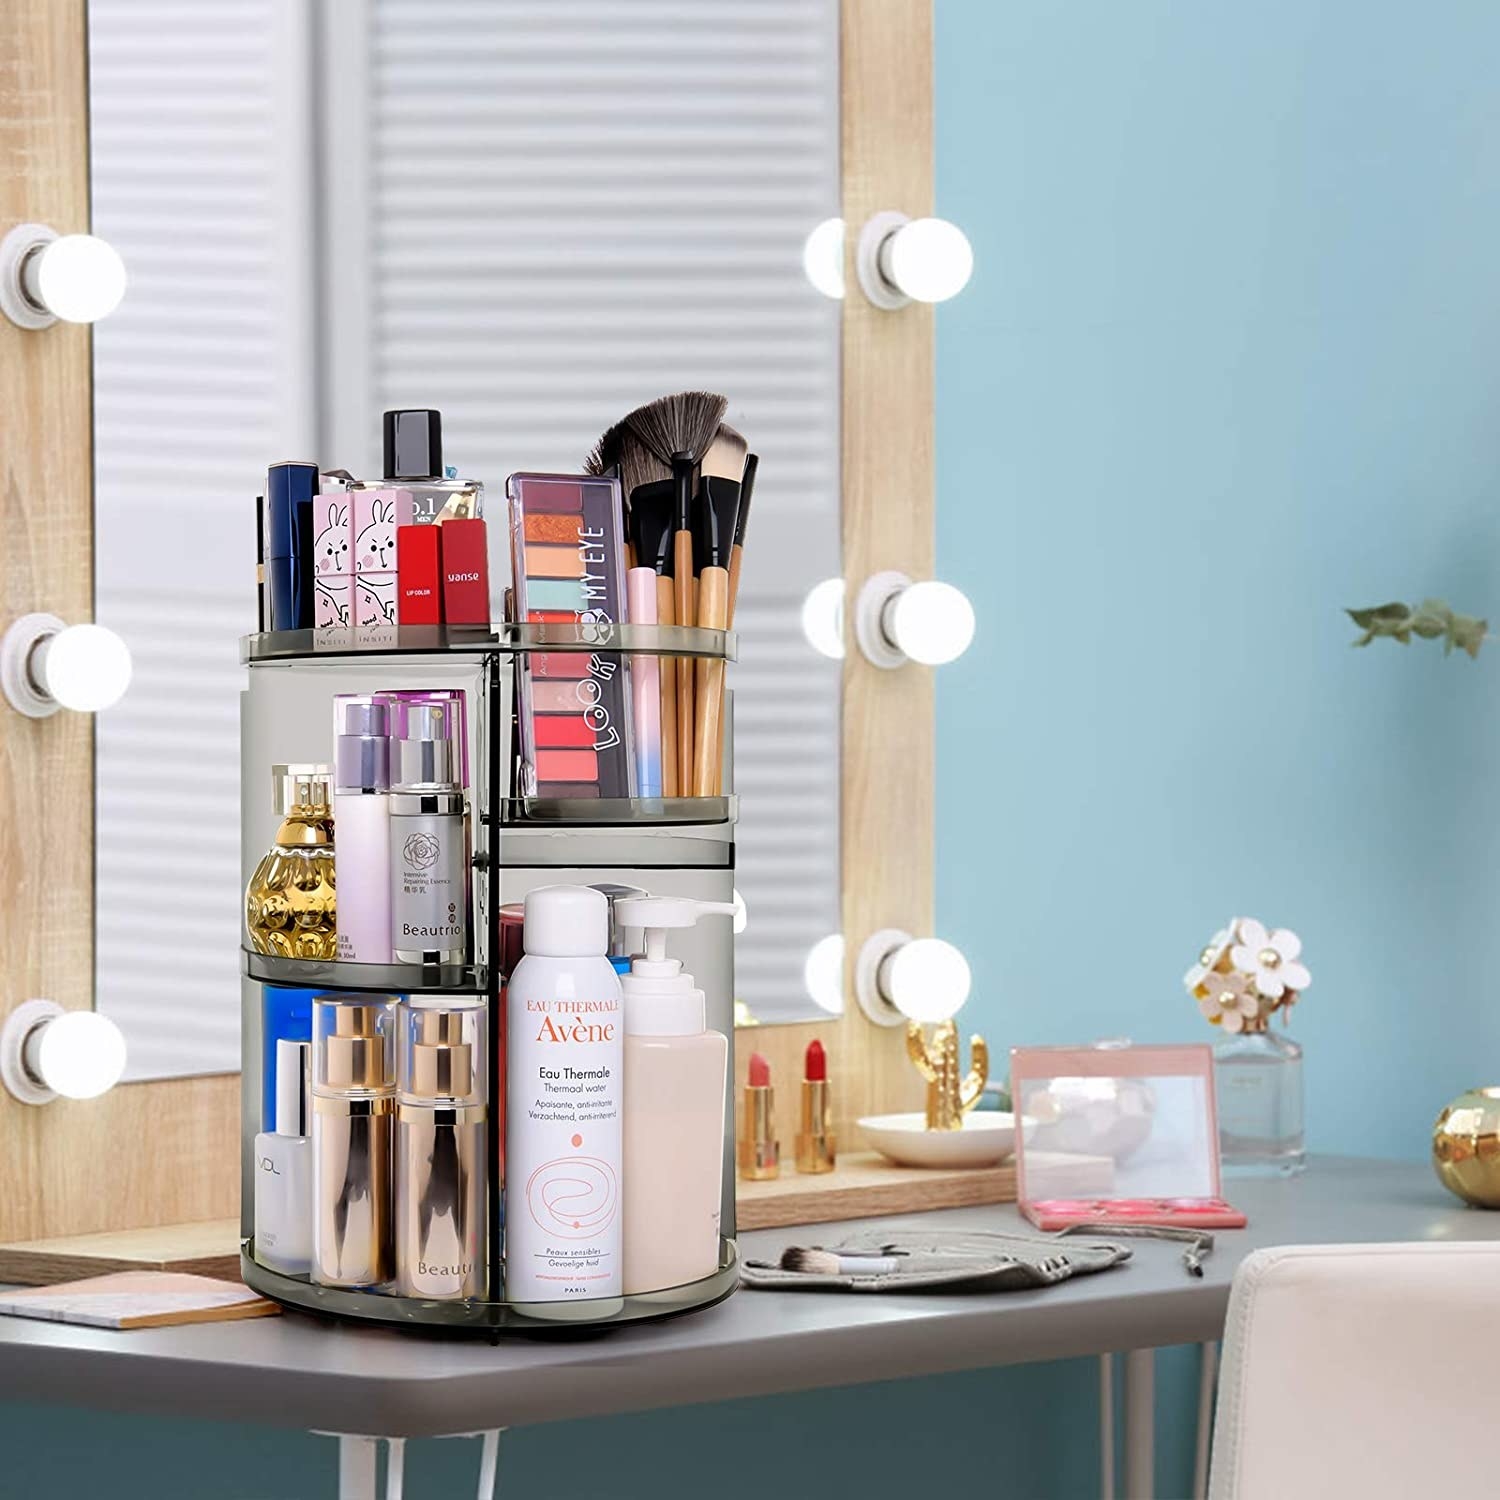 The filled makeup carousel on a vanity